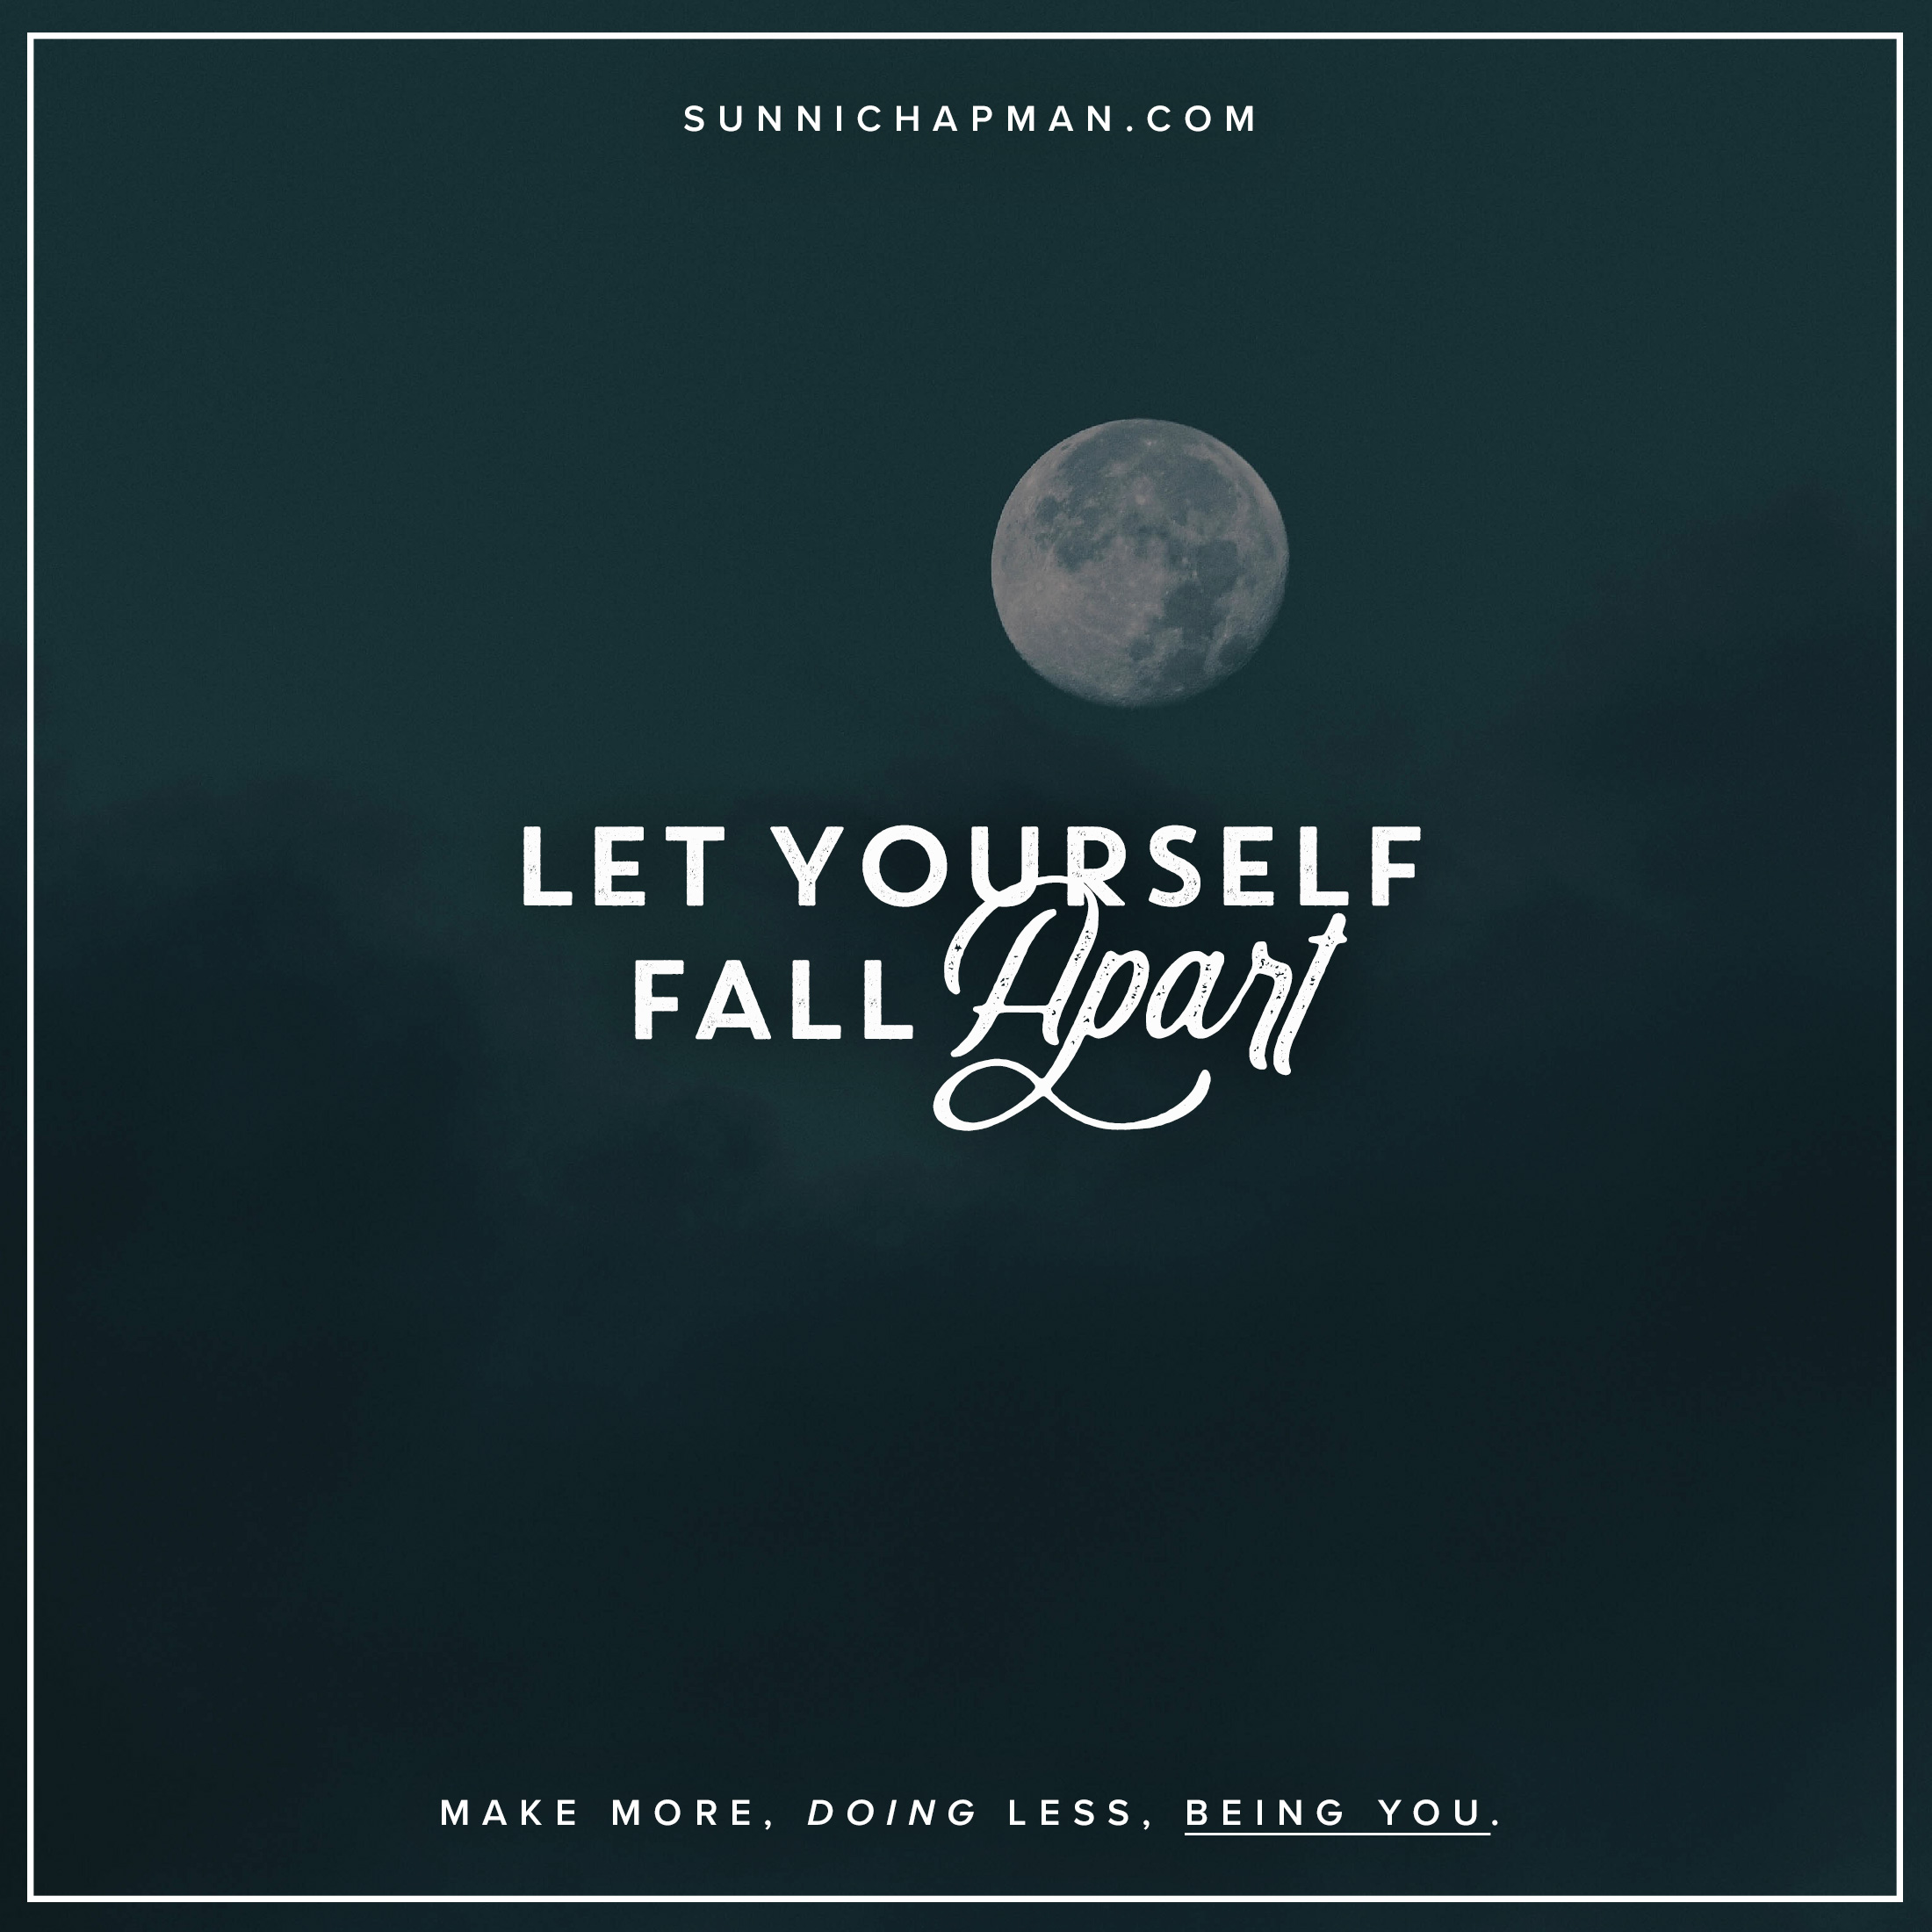 Clouds, moon in a grey-green background and text overlay - Let yourself fall apart,